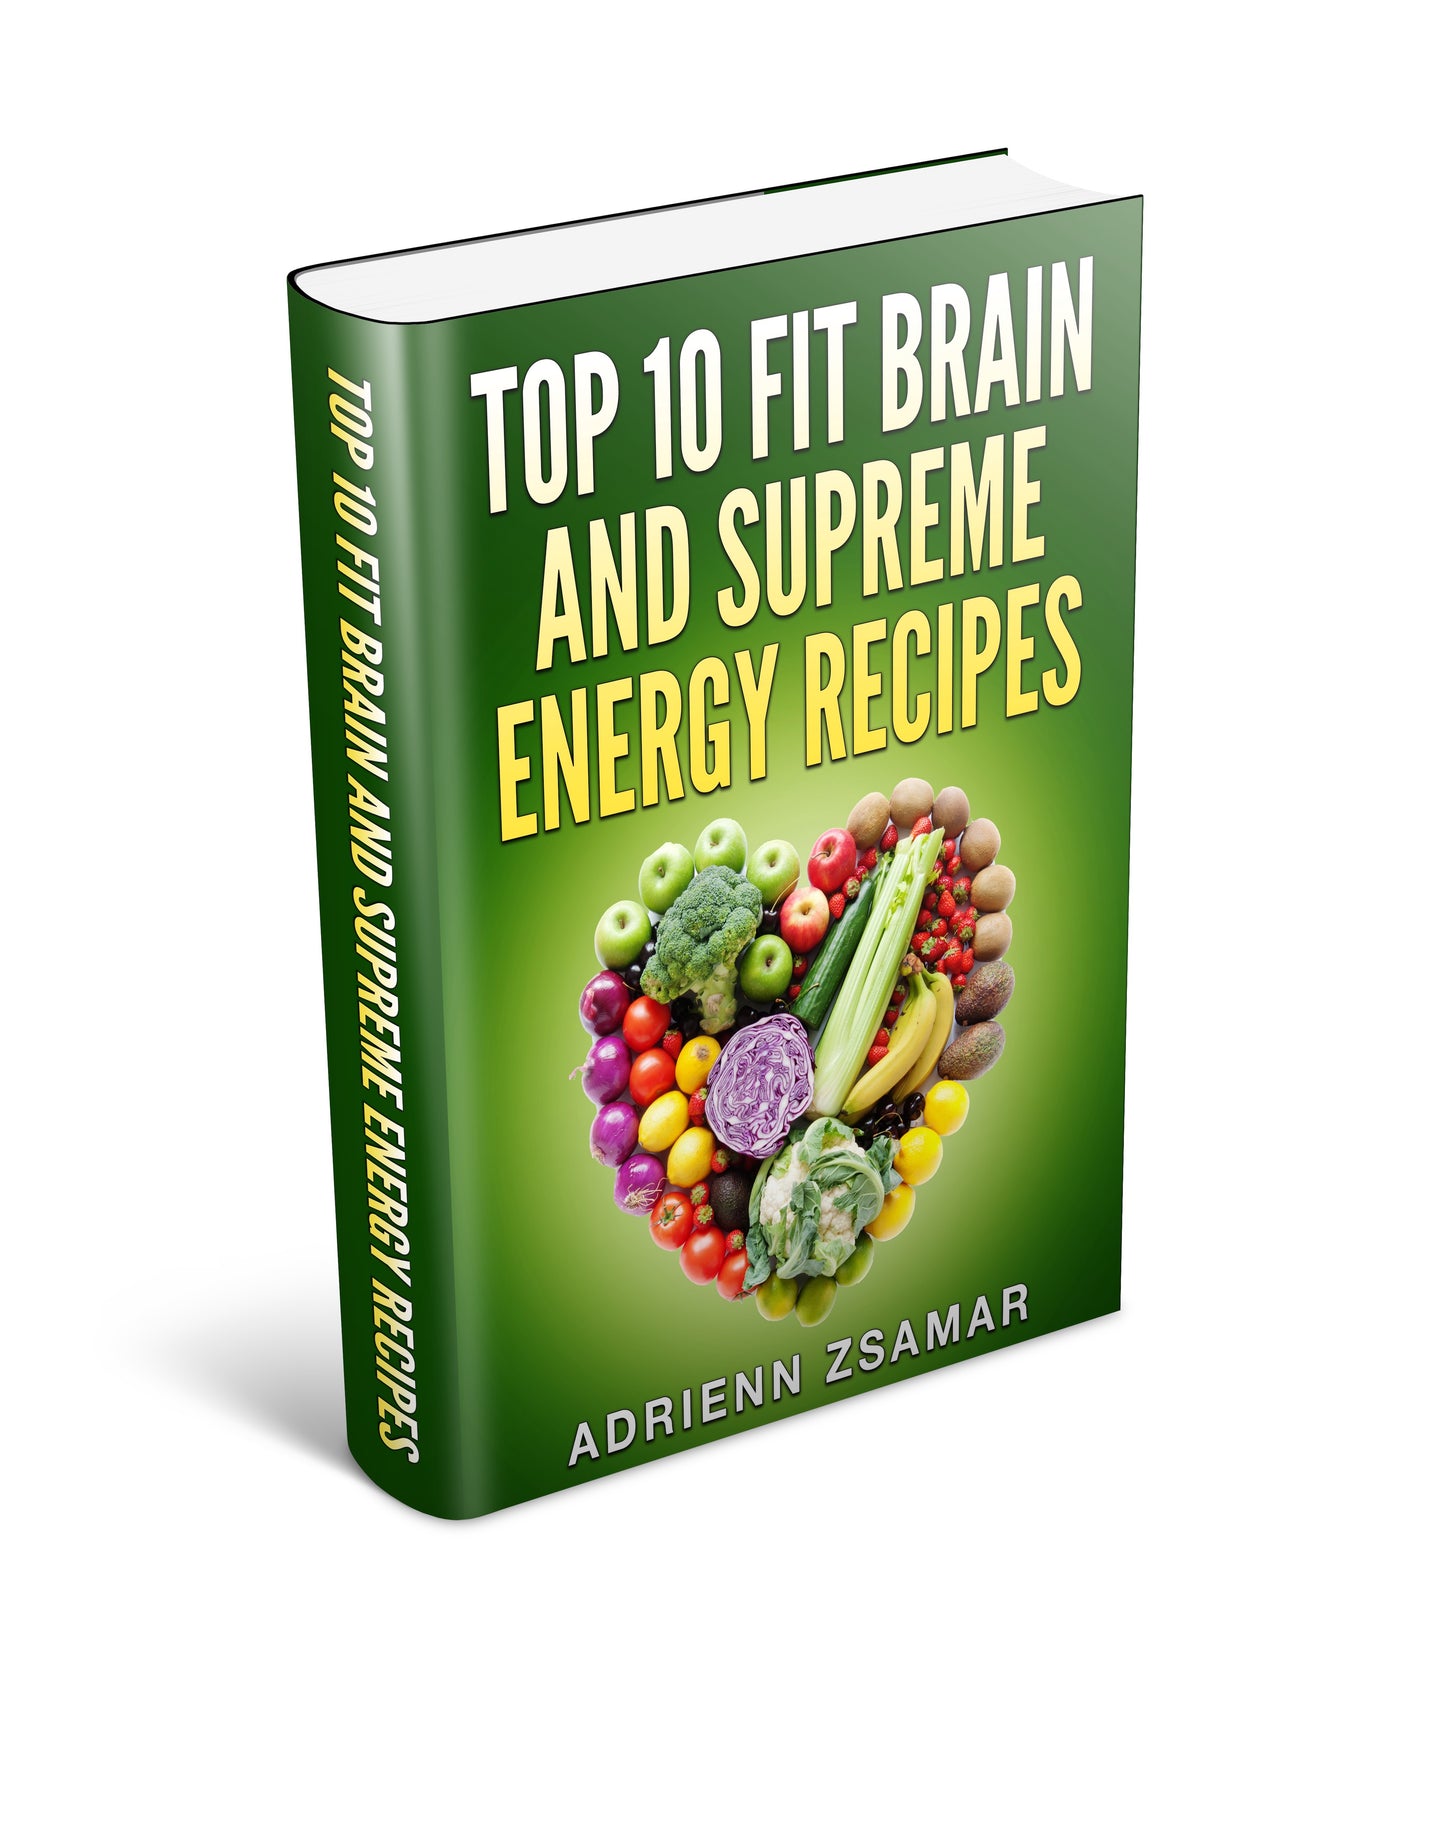 Top 10 Fit Brain And Supreme Energy Recipe Ebook